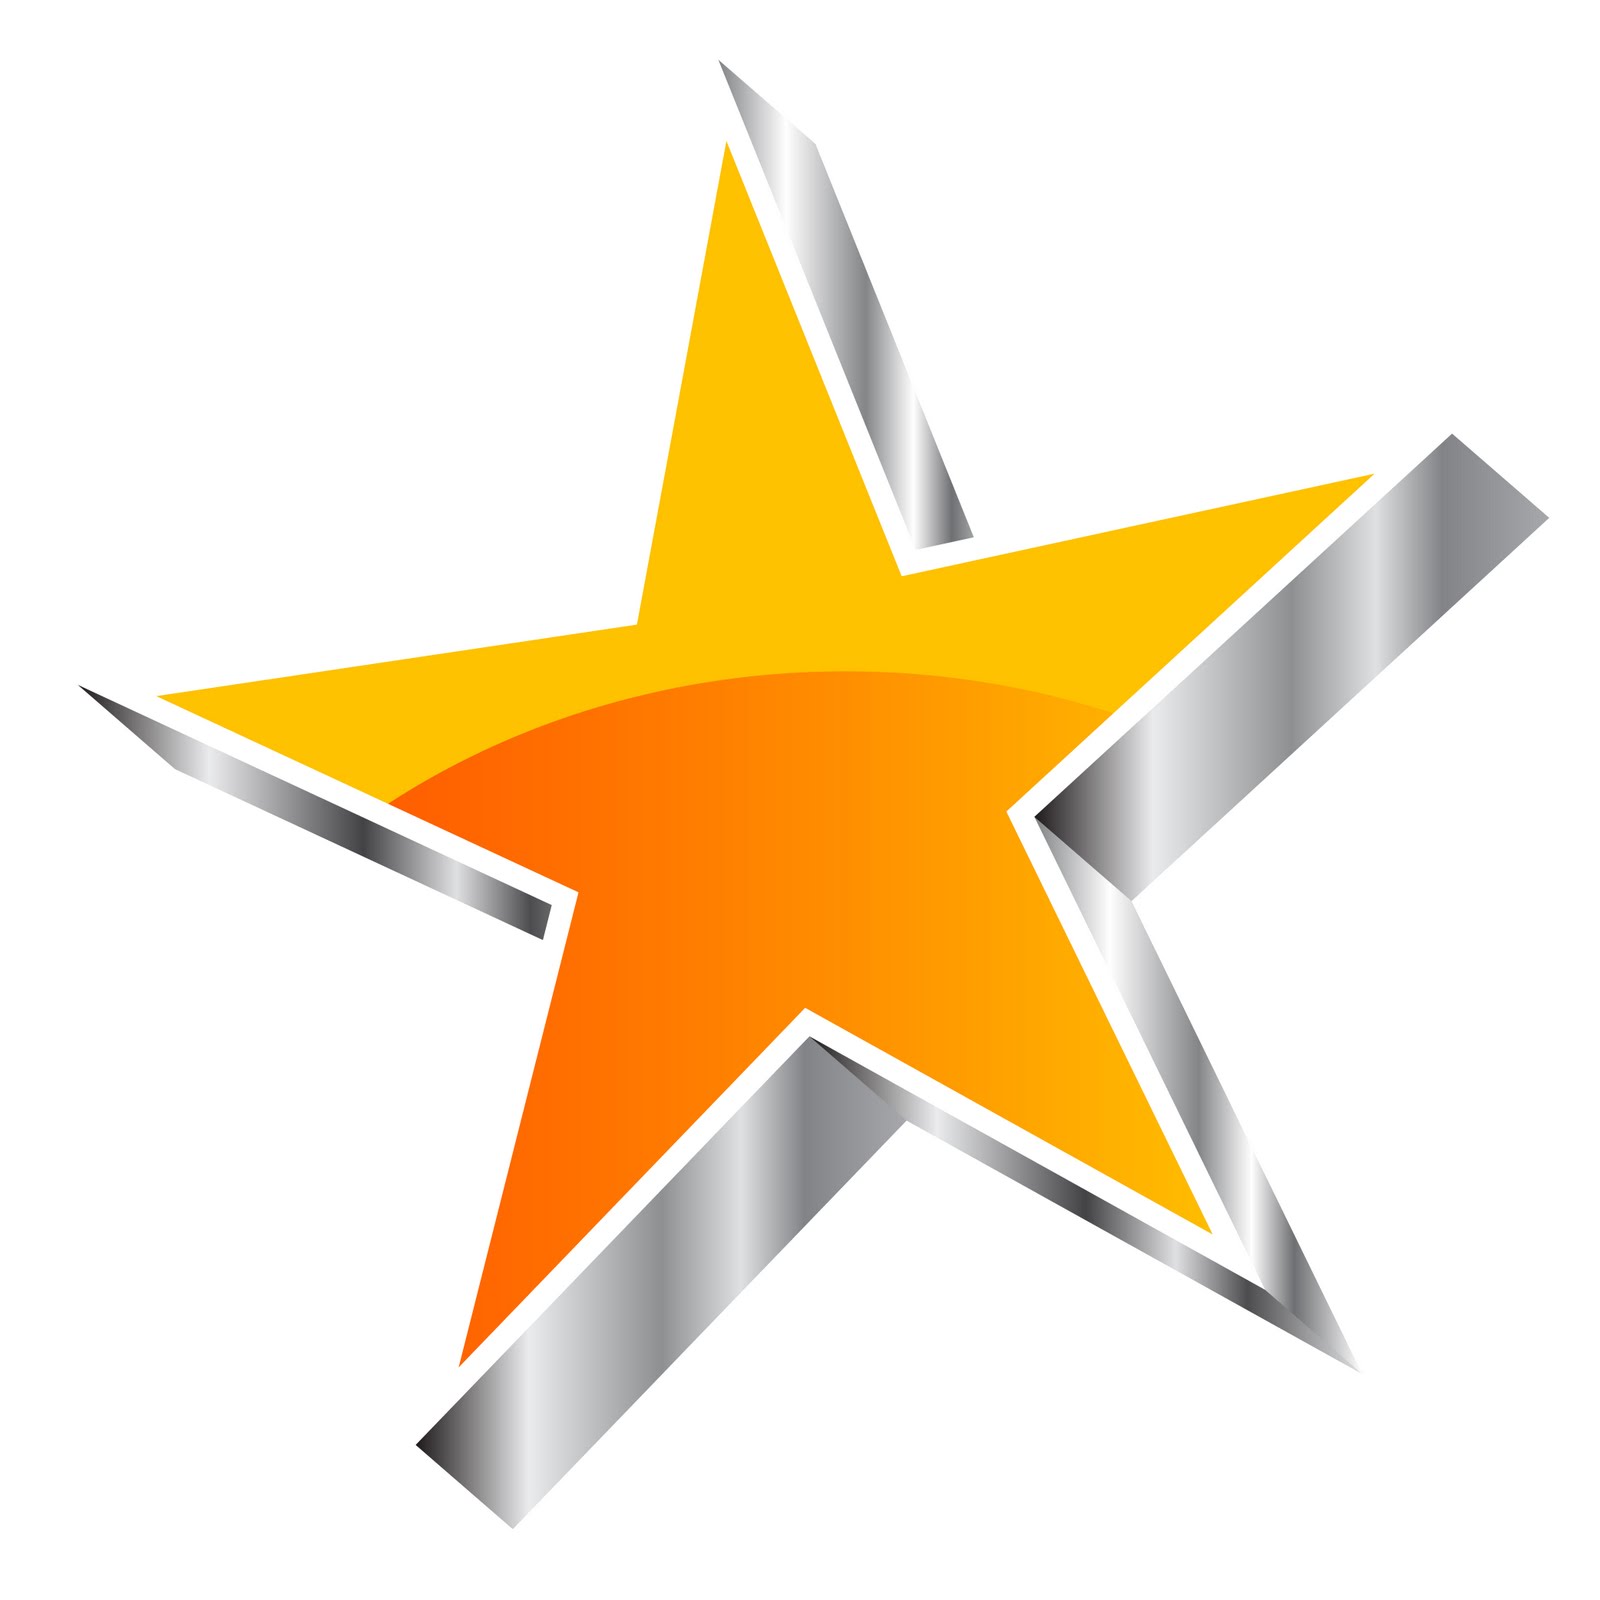 10 Silver Star Clip Art Free Cliparts That You Can Download To You